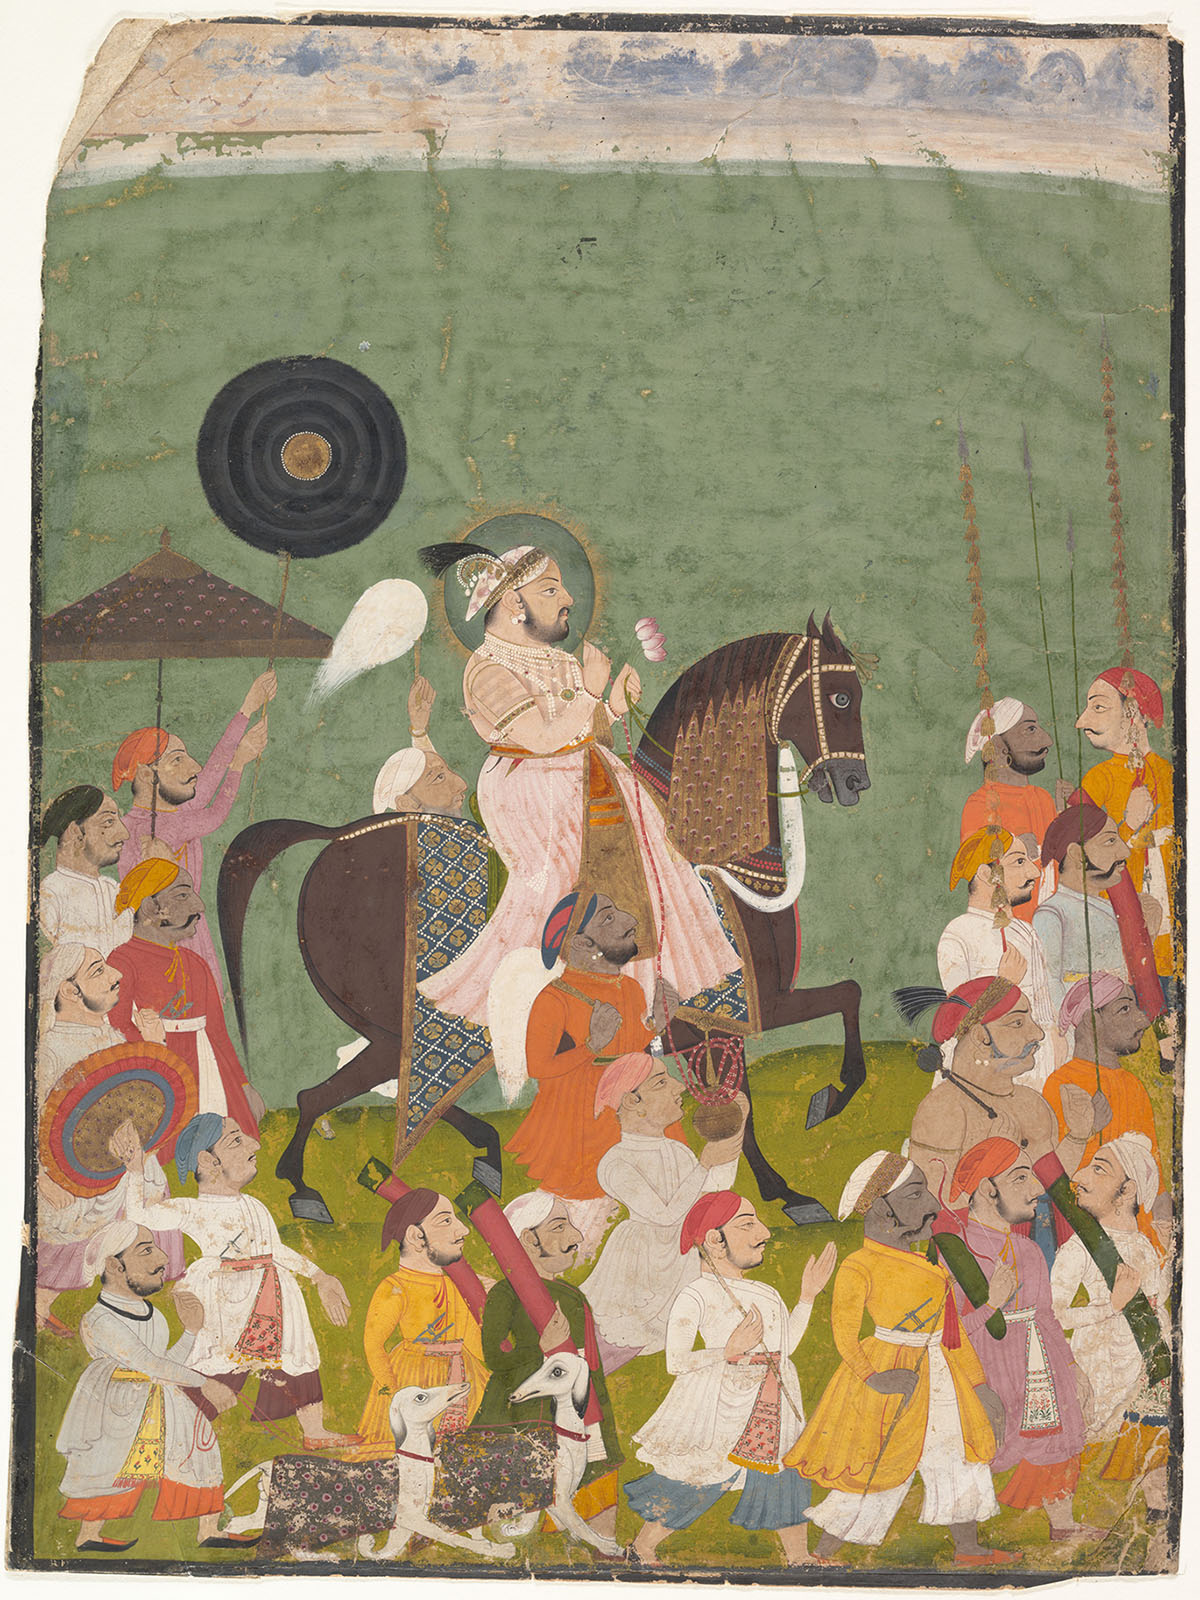 A painting depicting Jagat Singh II on horseback, with a procession accompanying him with swords and batons.